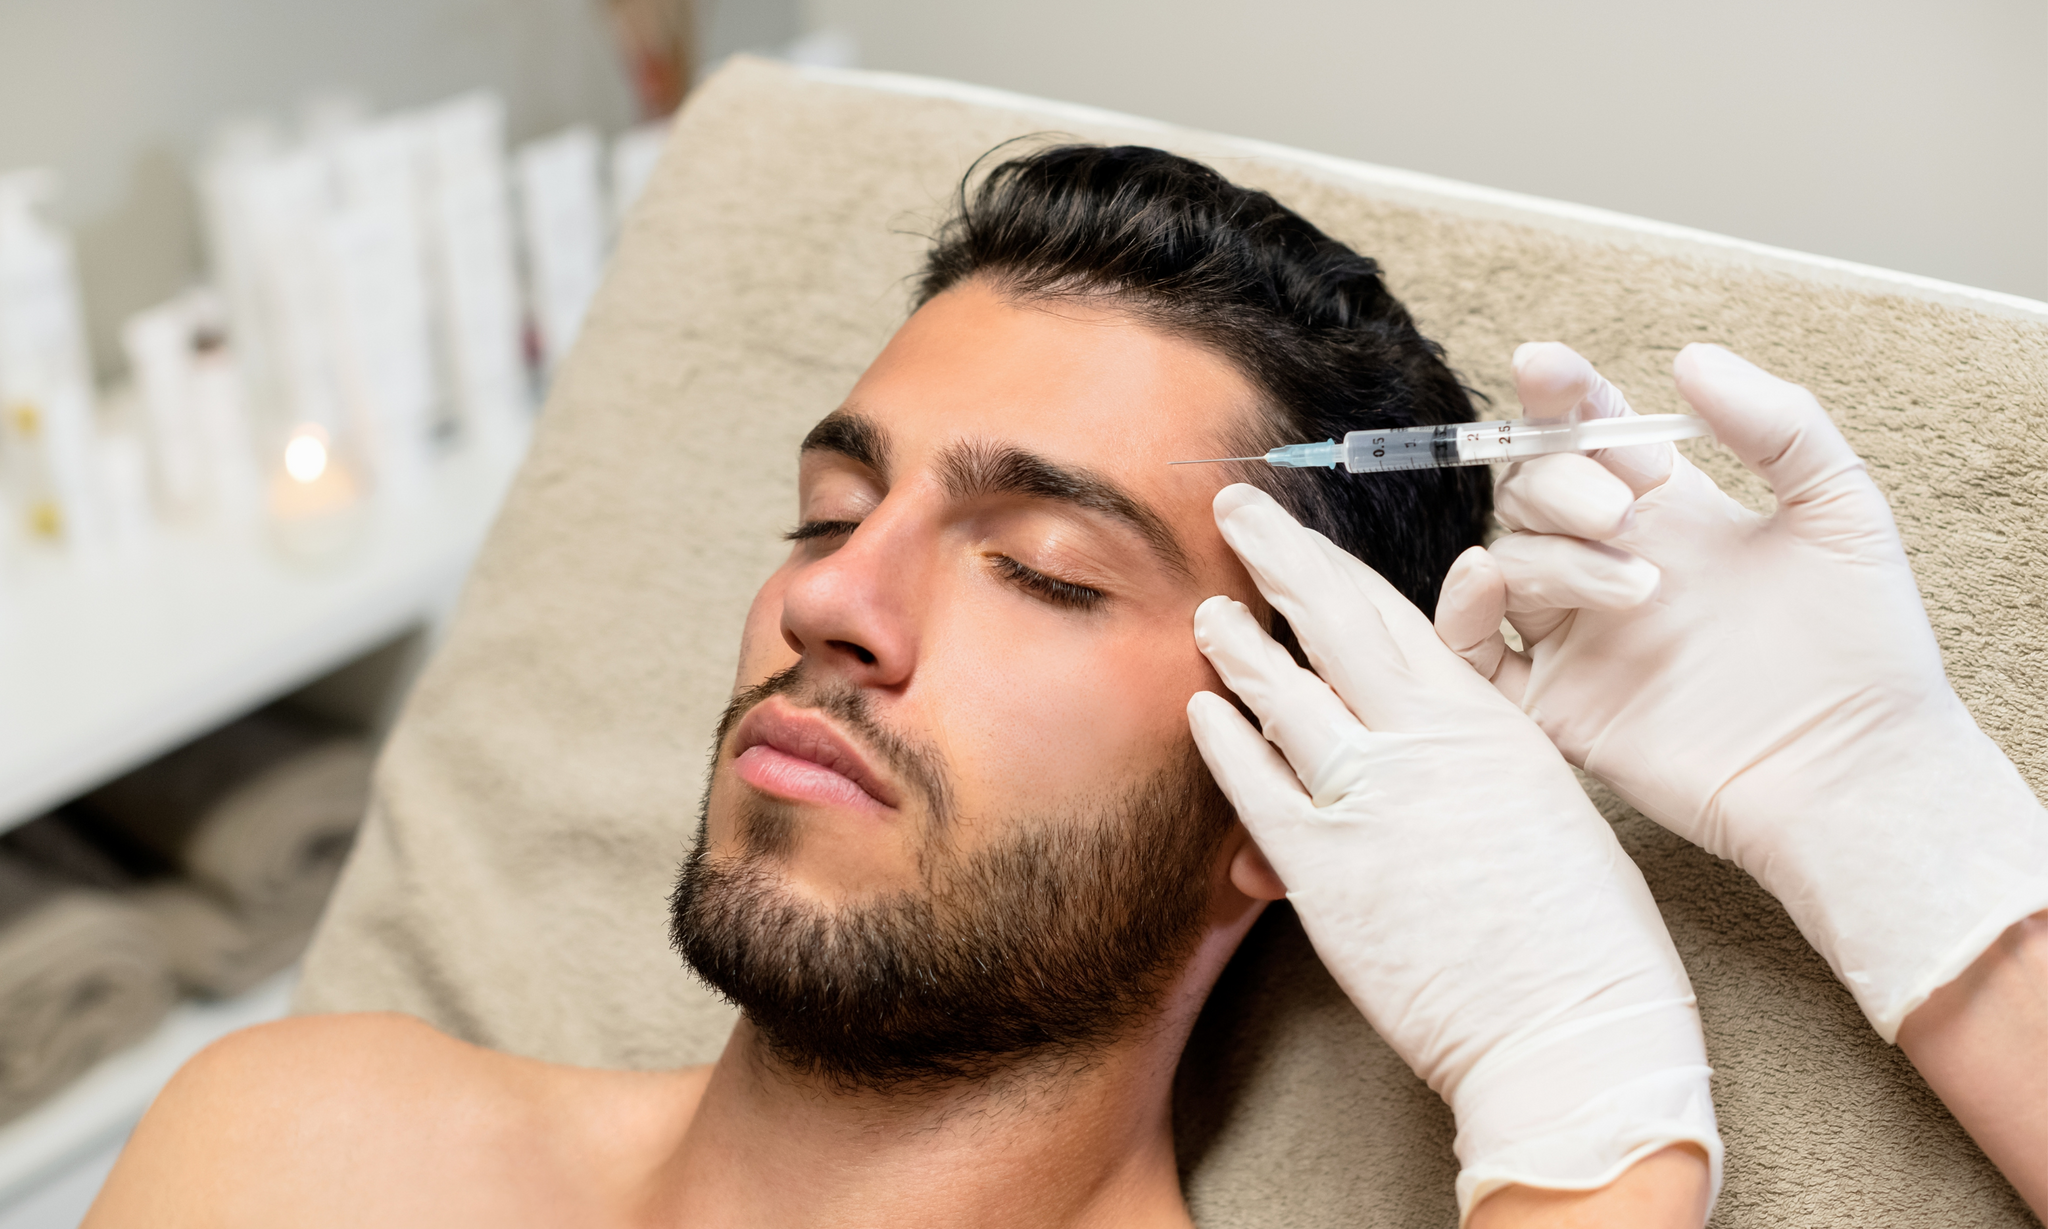 From Brotox to Fillers: The Rise of Injectables in Males